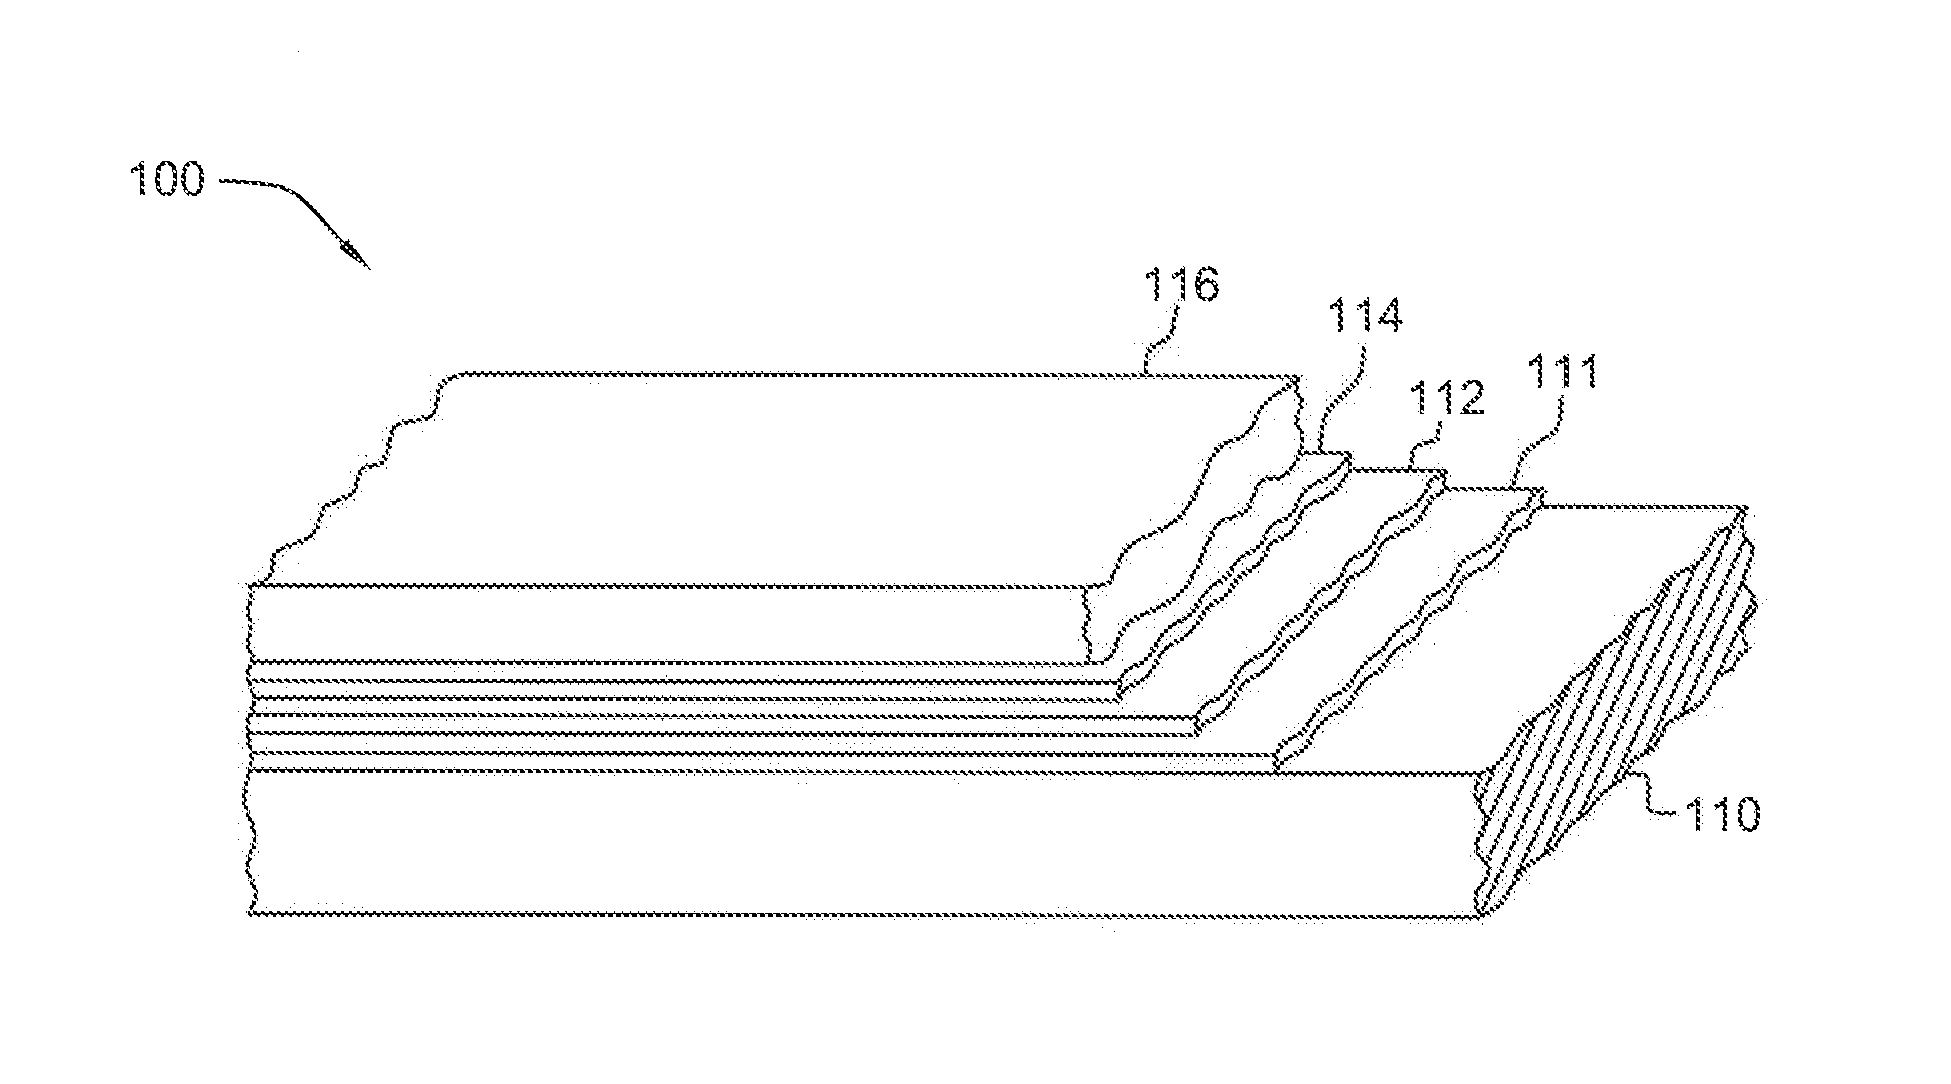 Superconducting fault current-limiter with variable shunt impedance